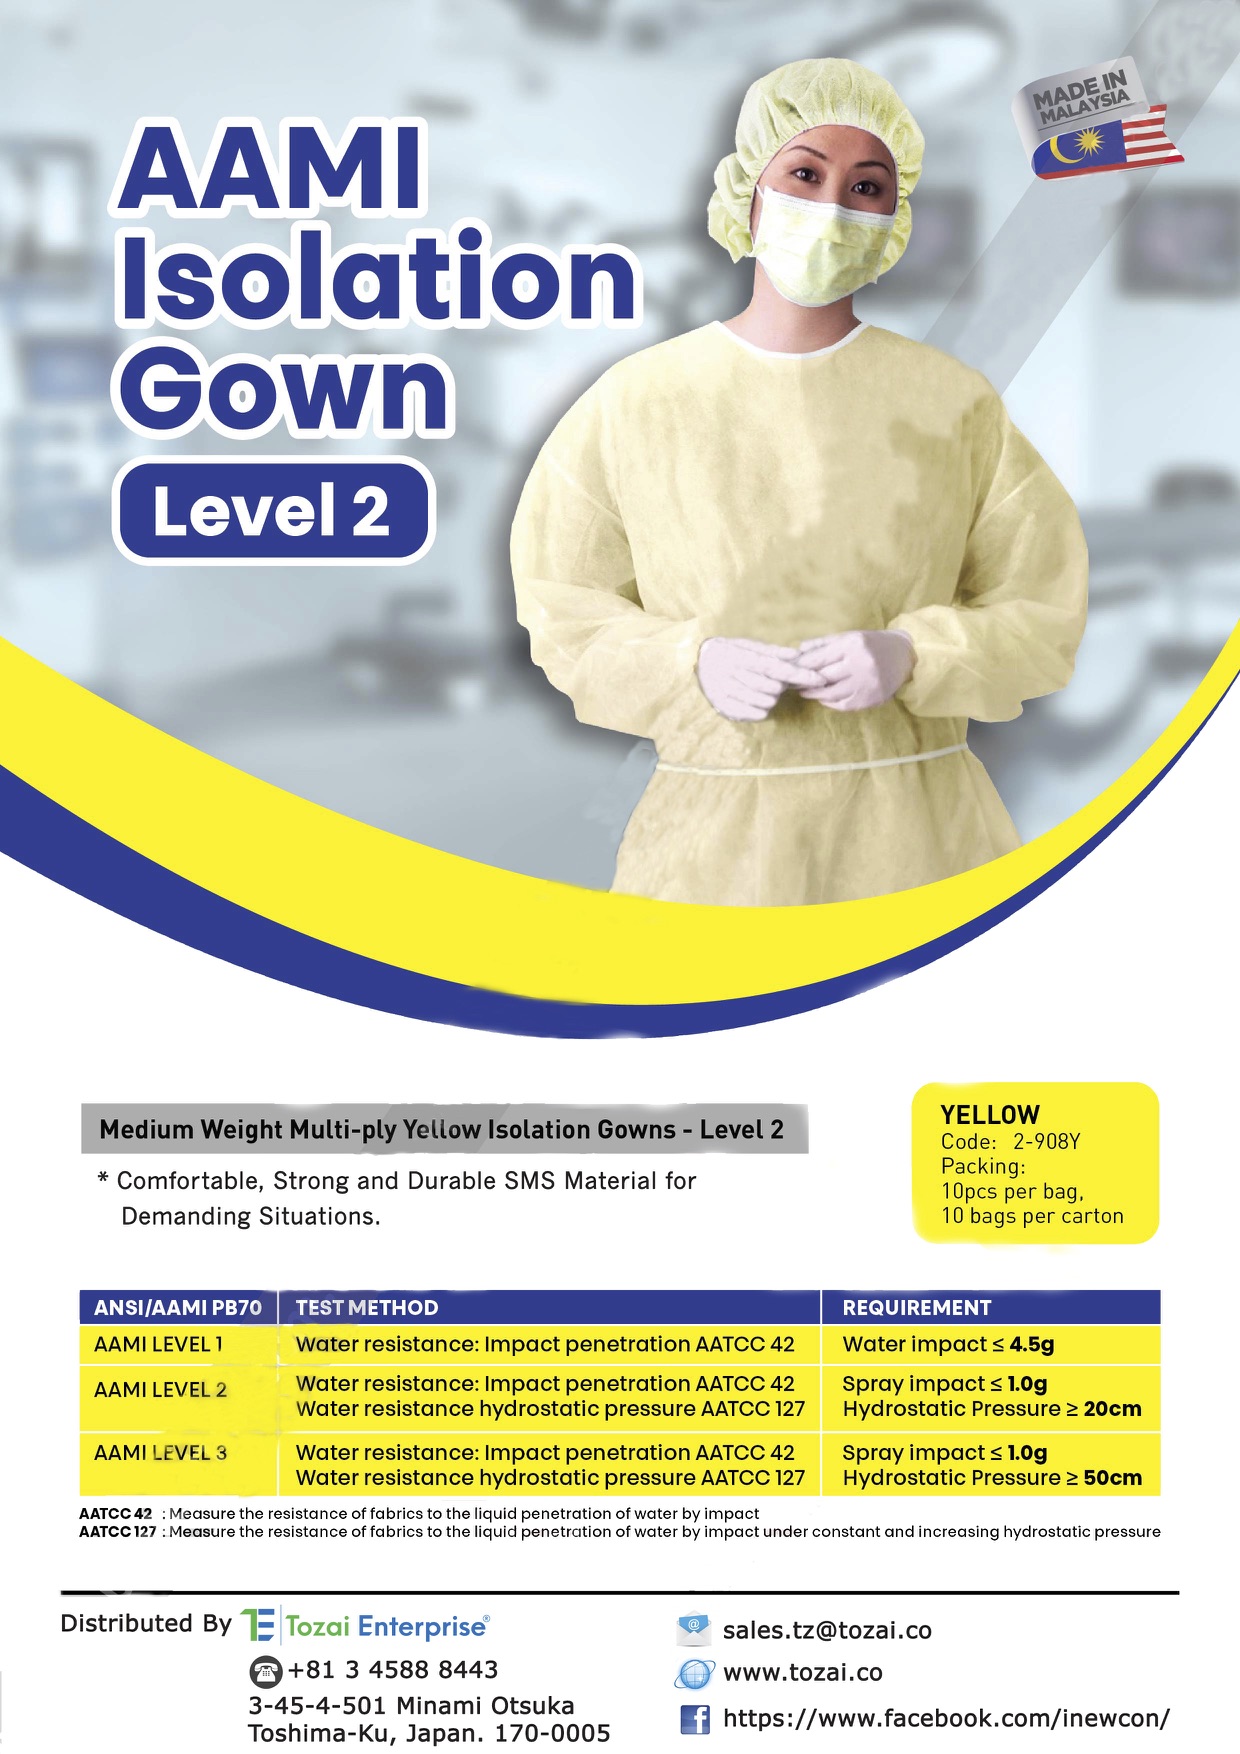 Yellow Isolation Gown - Level 2 AAMI - reusable Vestex fabric 100% poly |  The Surgical Room